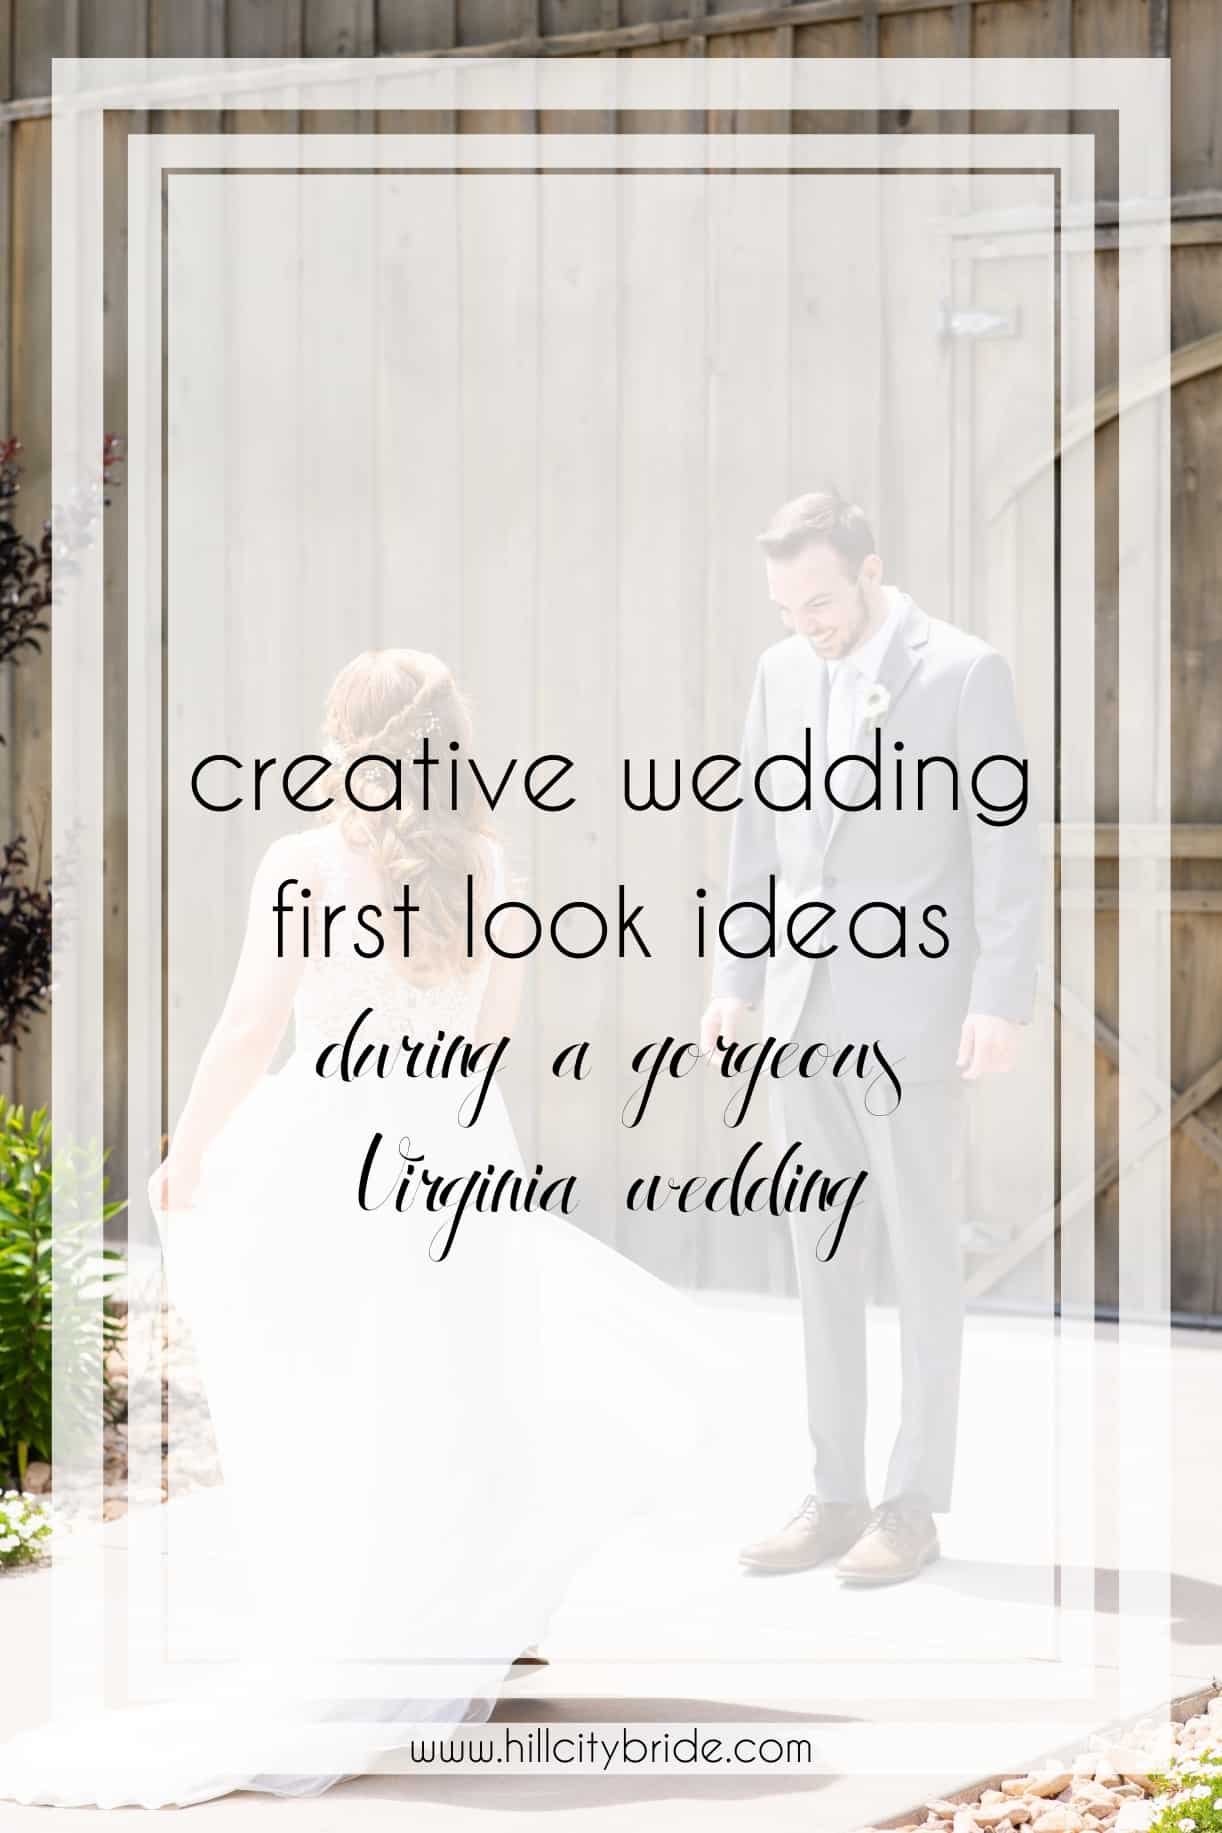 3 Absolutely Creative Wedding First Look Ideas You Must Copy